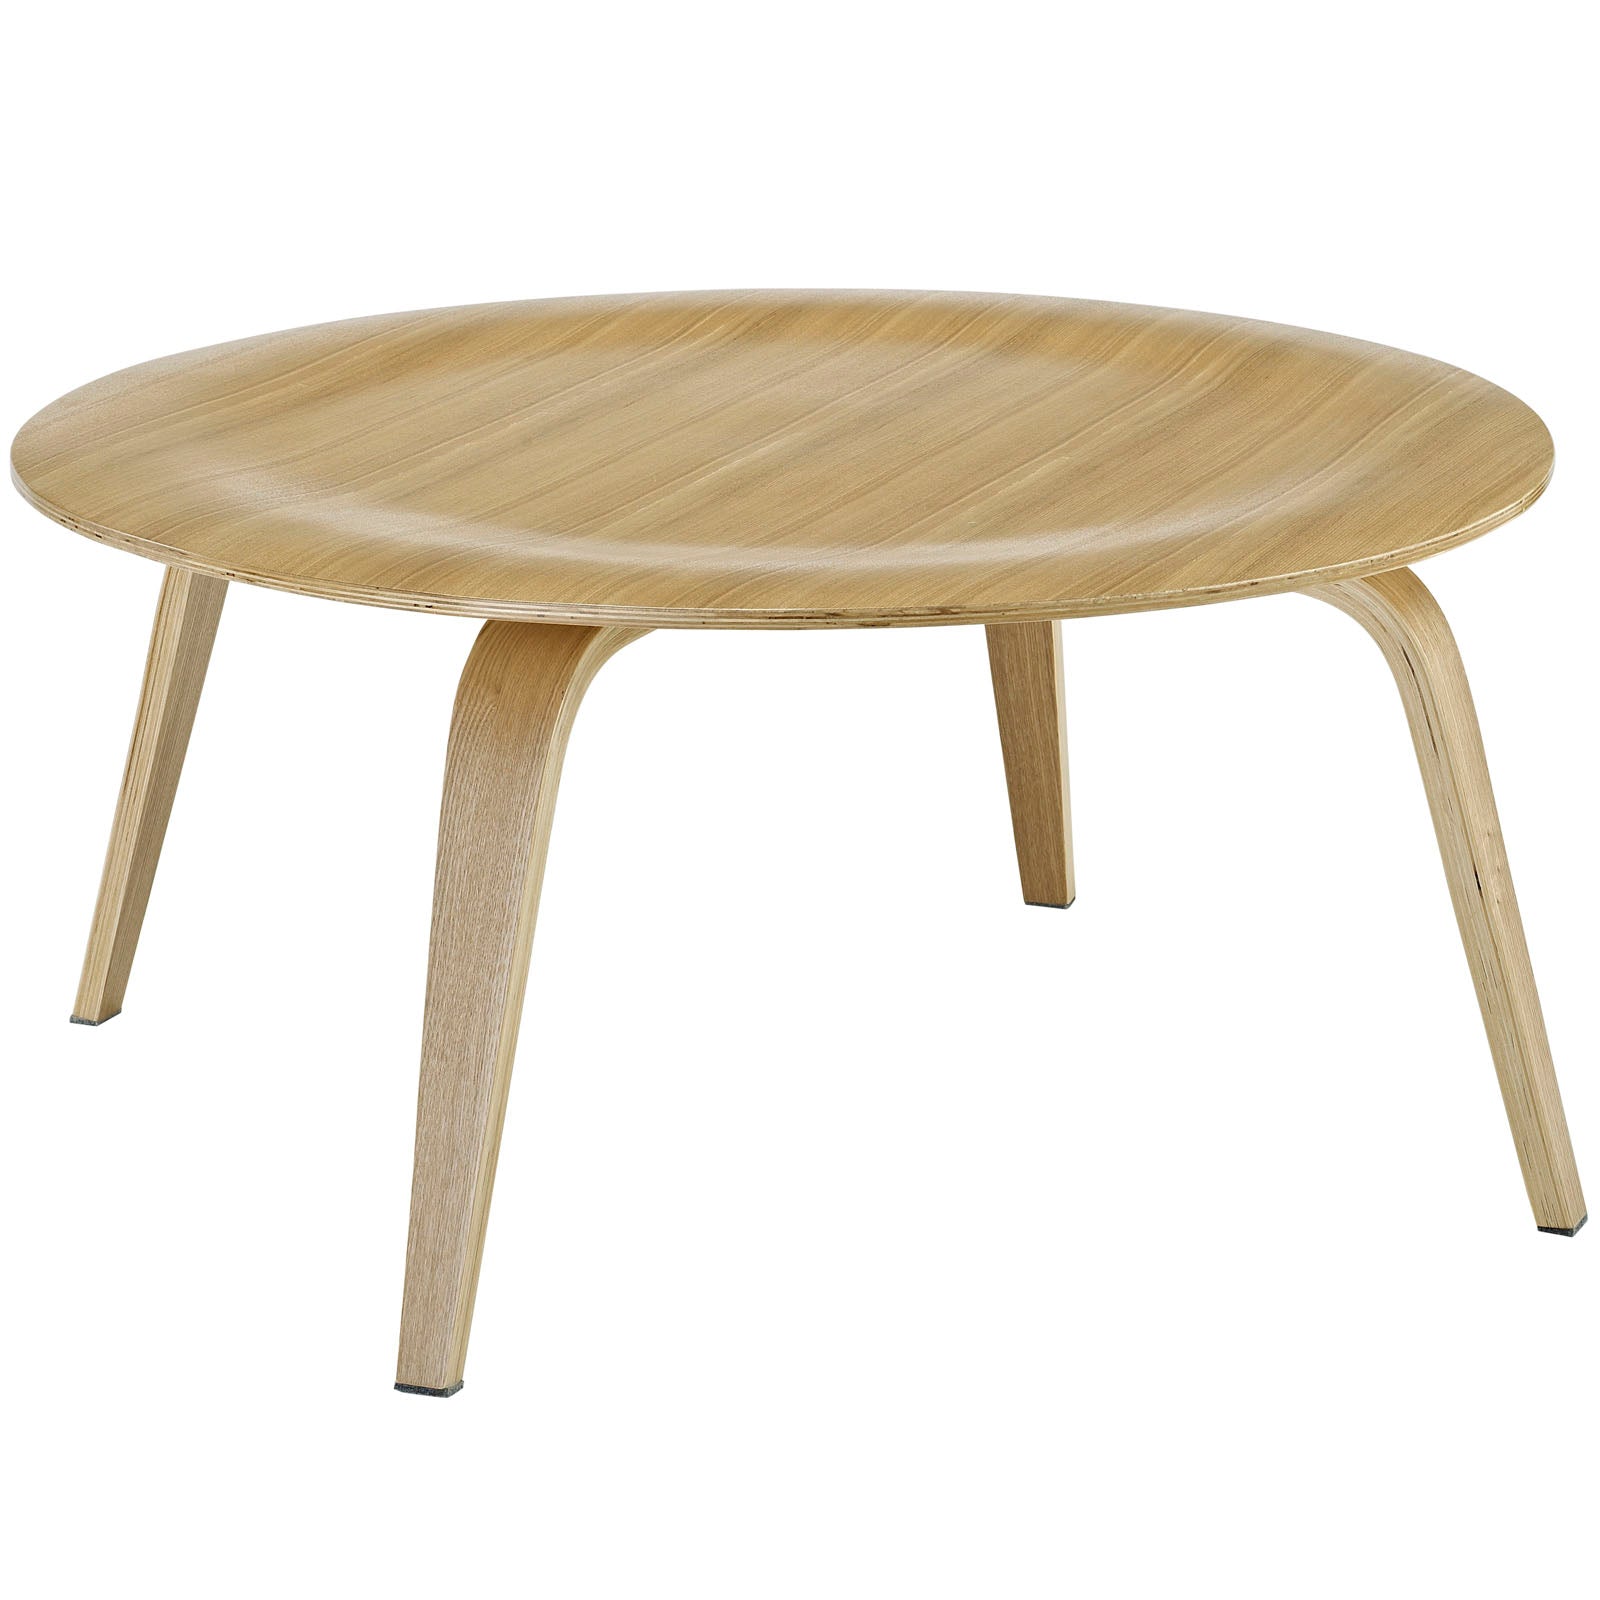 Modern Plywood Coffee Table - Round Meeting Room Conversation Table